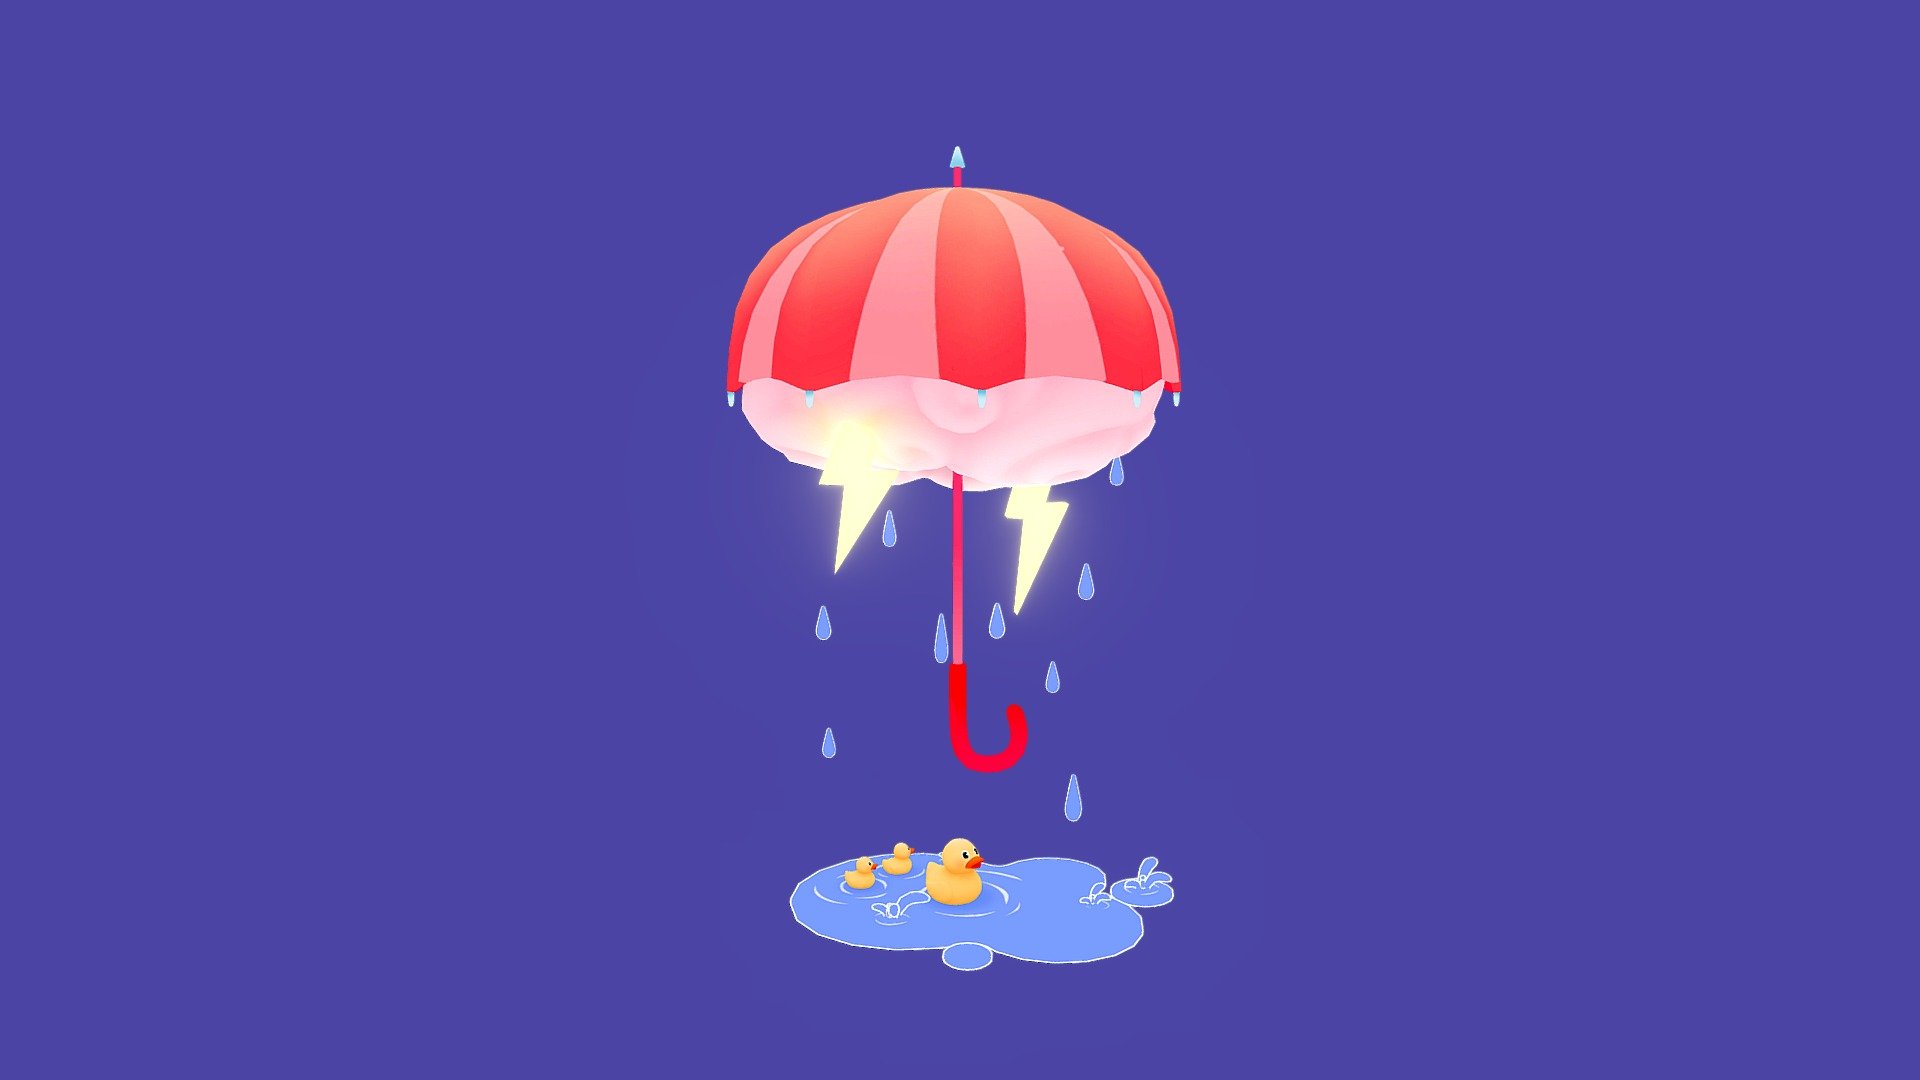 Here's another project I created for fun! 

I have a tattoo of an umbrella with the cloud, rain and lightning and I really like it. I wondered what it would looked like in 3D. I also added a twist with the ducks because it was missing something for it to be interesting in full 3D. 

The concept and tattoo is from Misterstevensjames (his instagram account : https://www.instagram.com/misterstevenjames/?hl=fr-ca )

Hope you guys like it too! 

https://www.artstation.com/apref - Rainy Days - 3D model by Agathe Préfontaine (@apref) 3d model